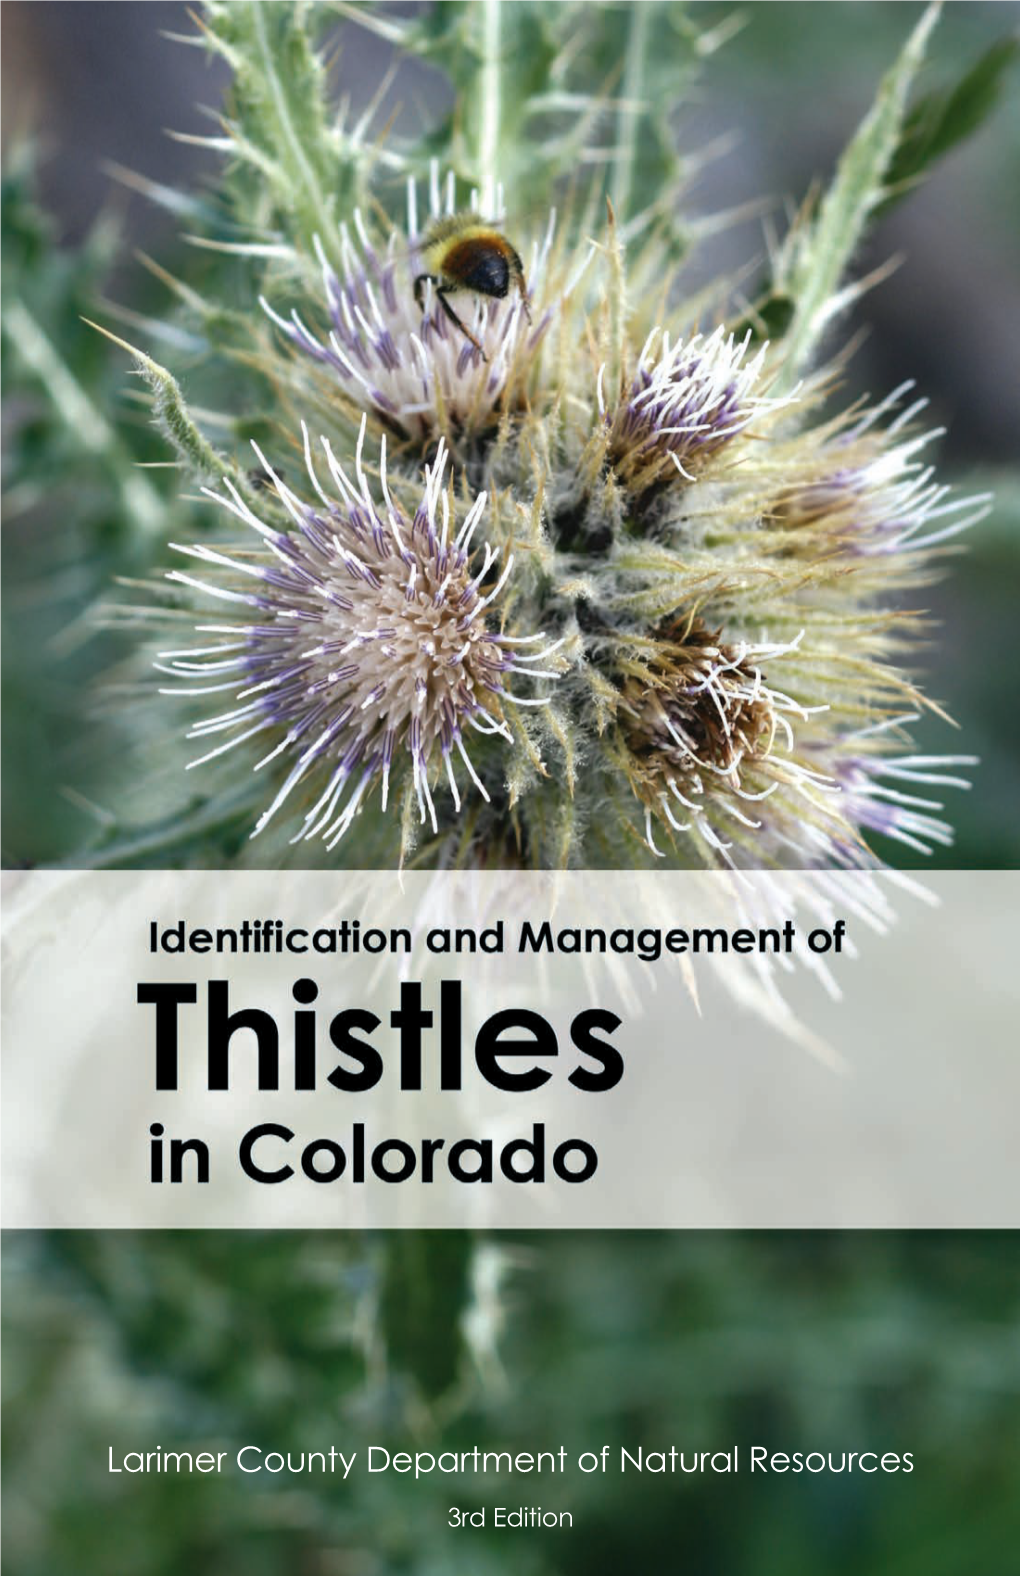 Identification and Management of Thistles in Colorado